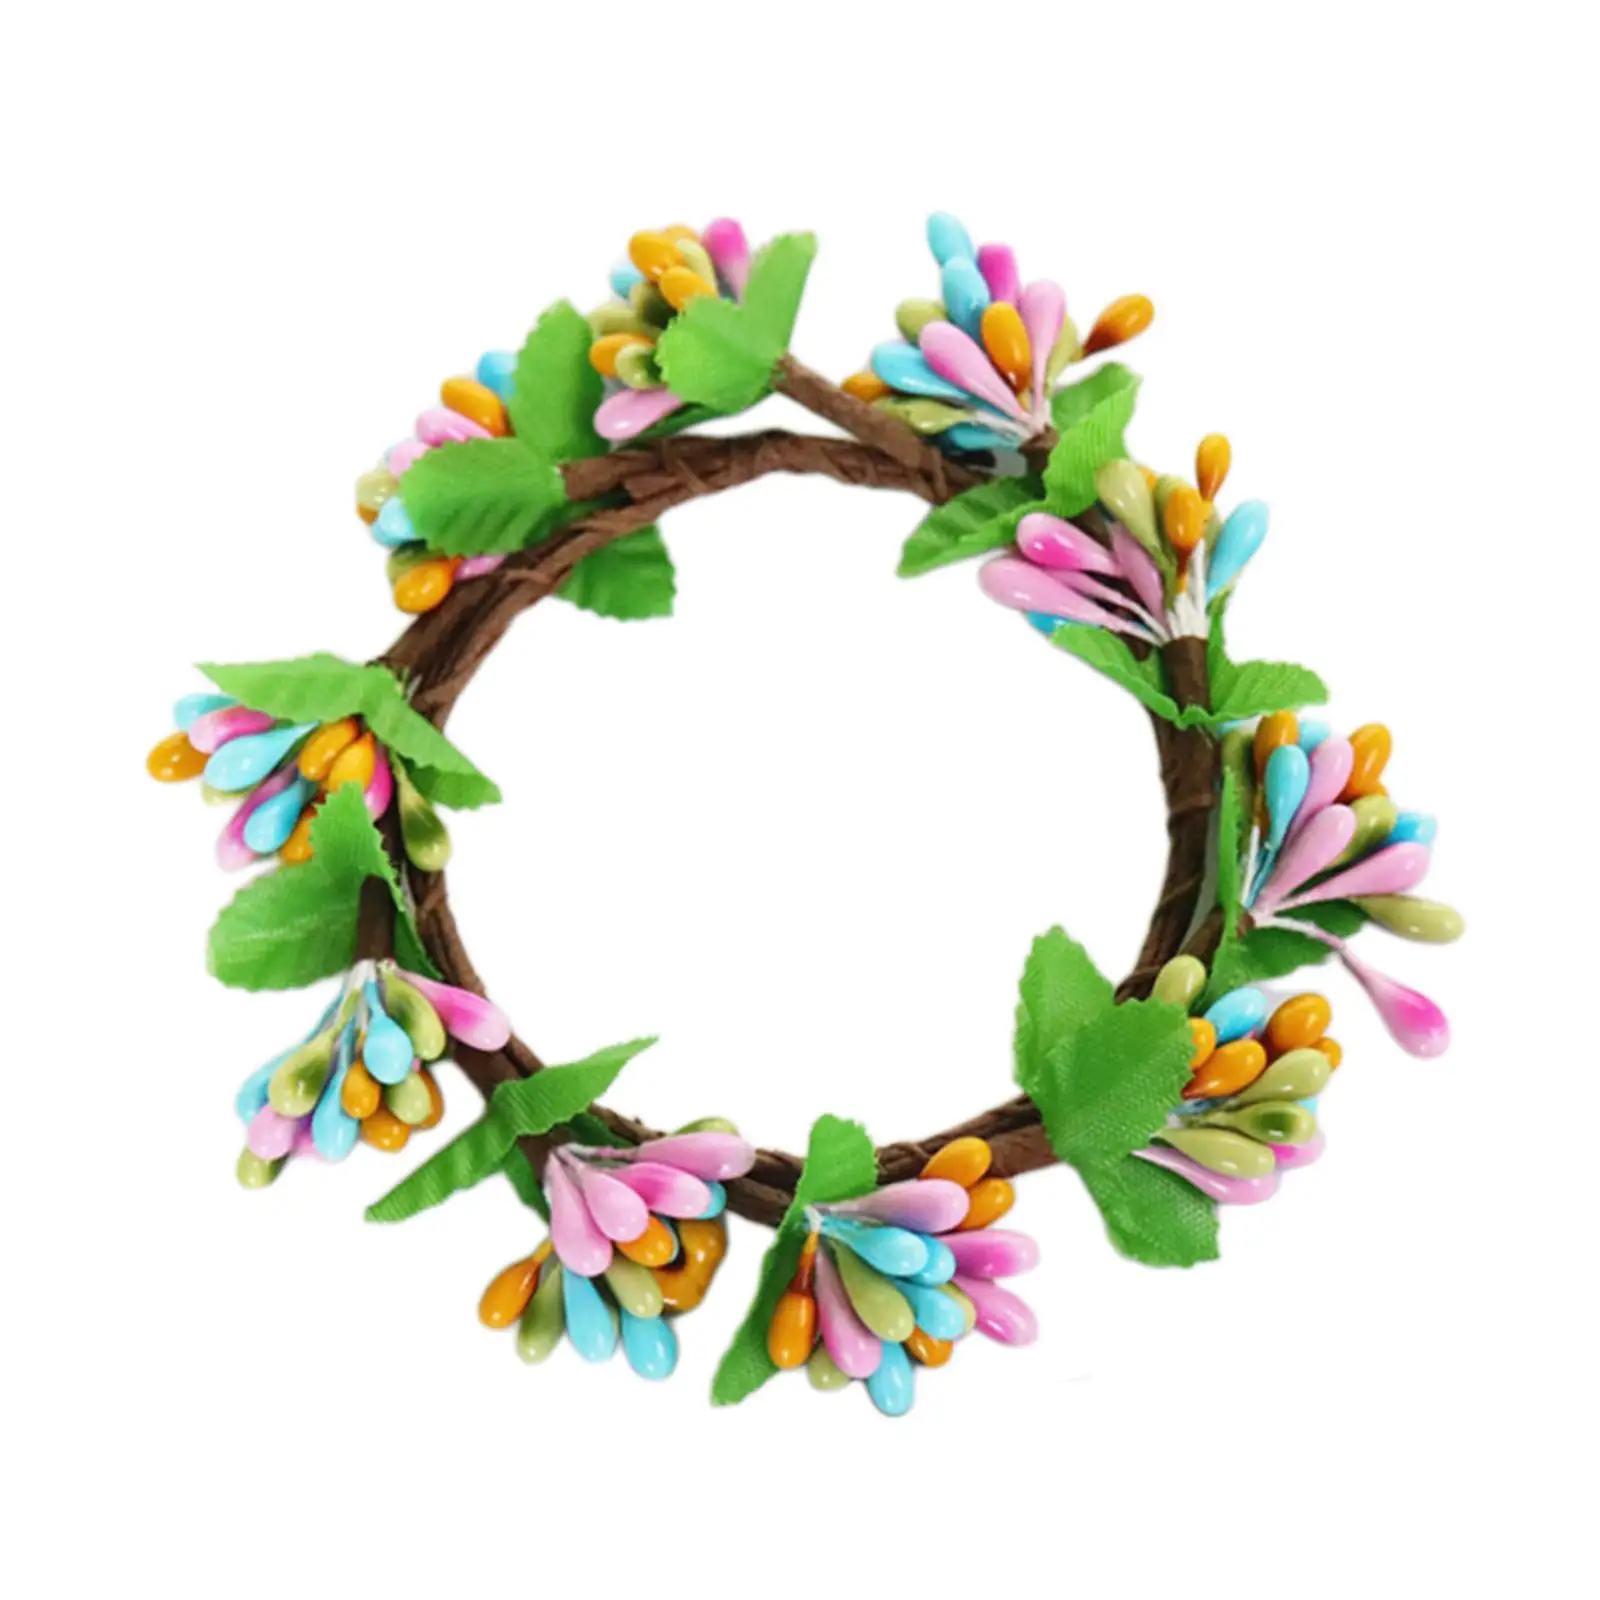 Easter Candle Rings Wreath Decor Mini Hanging Garland Table Centerpiece Greenery Leaves Candle Cup Holder for Farmhouse Festival